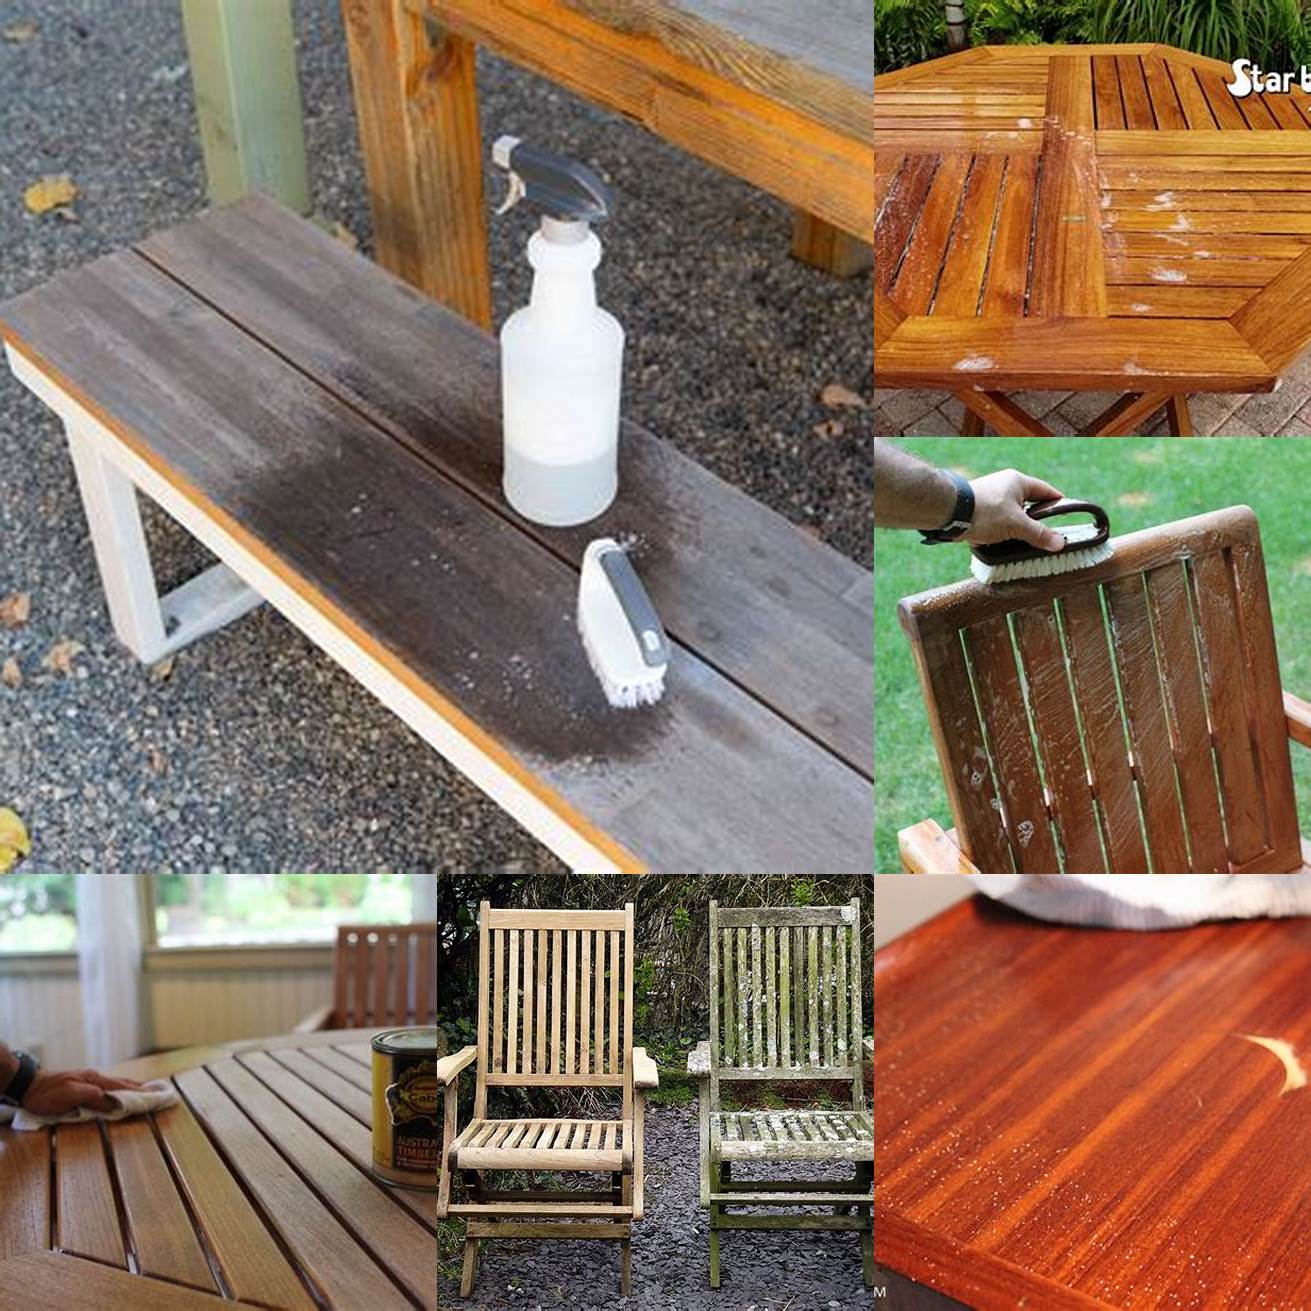 Teak Furniture after Cleaning